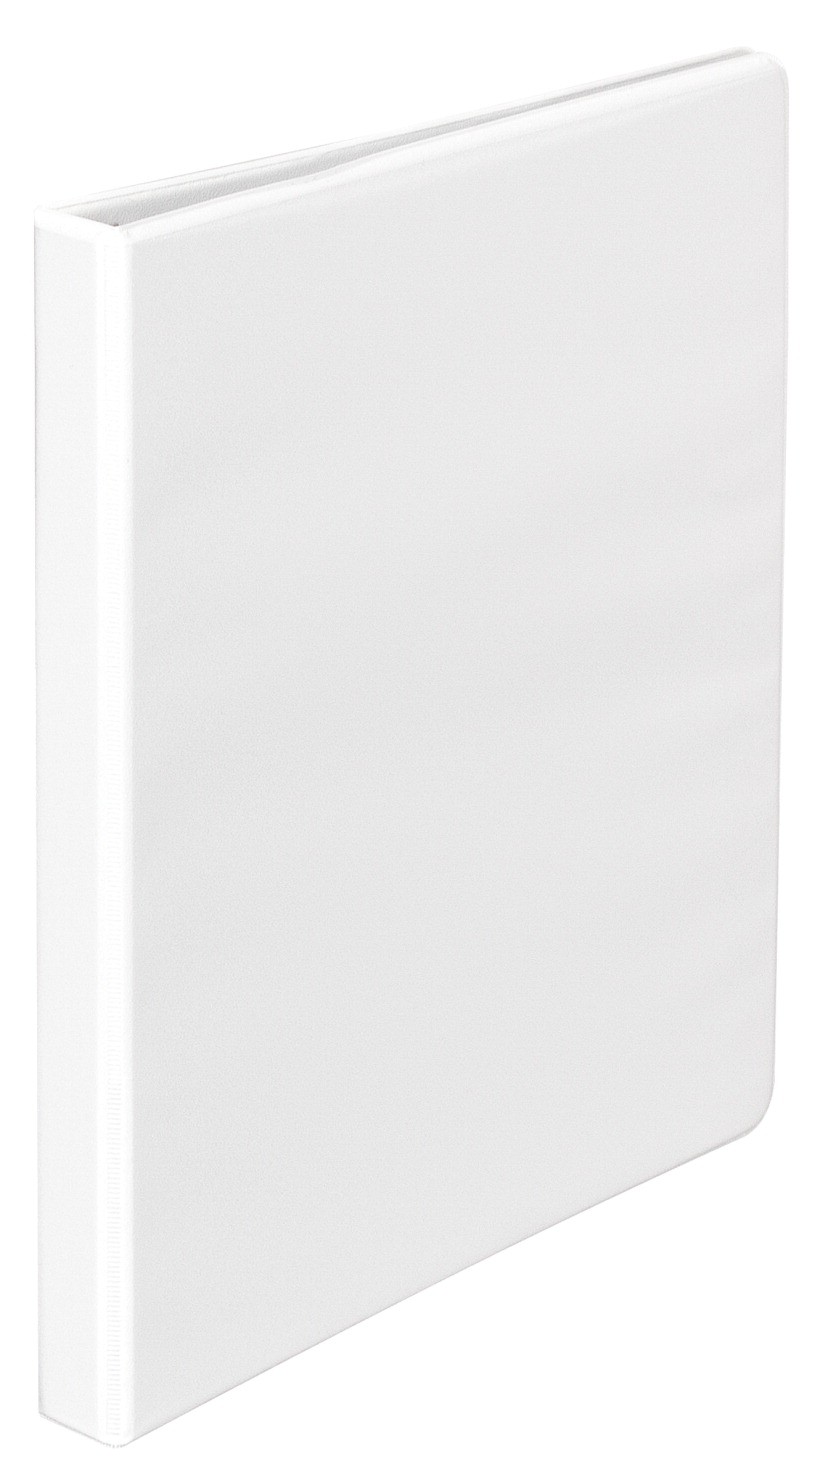 1/2" Clear View Binder, 3 Ring, White